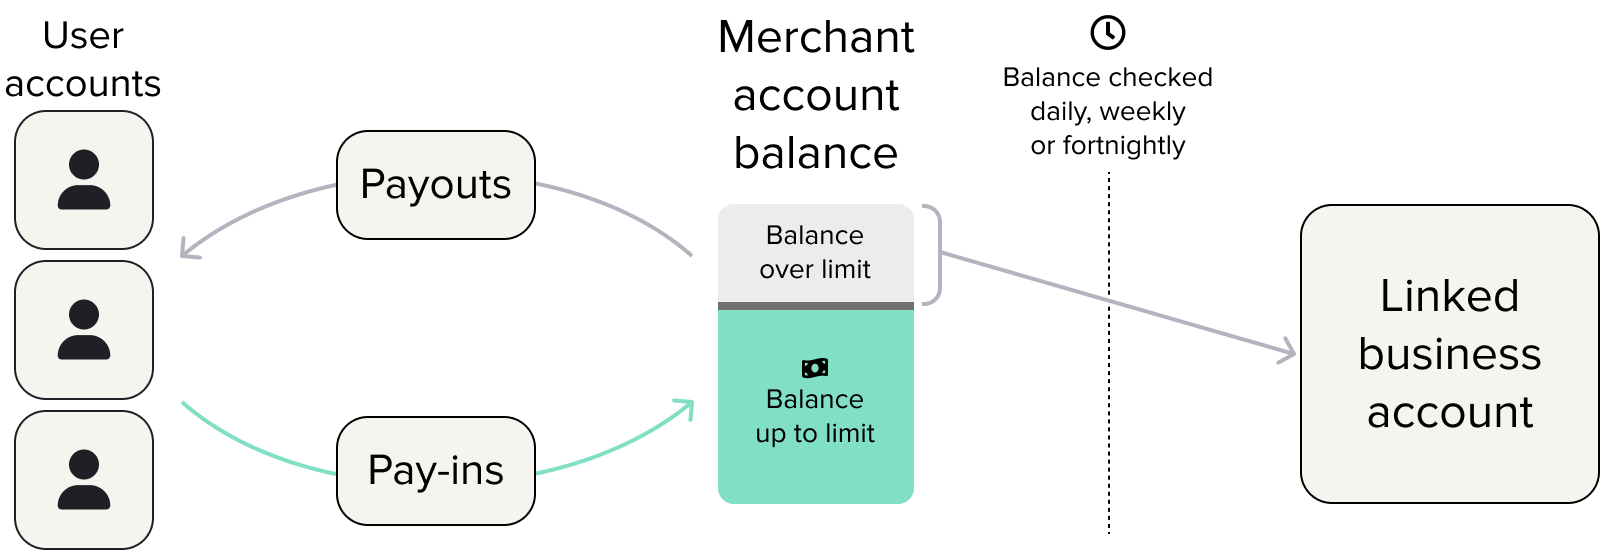 The merchant account balance increases and decreases with pay-ins from and payouts to users. The balance is checked on a schedule, and funds over the specified maximum balance swept to the linked business account.